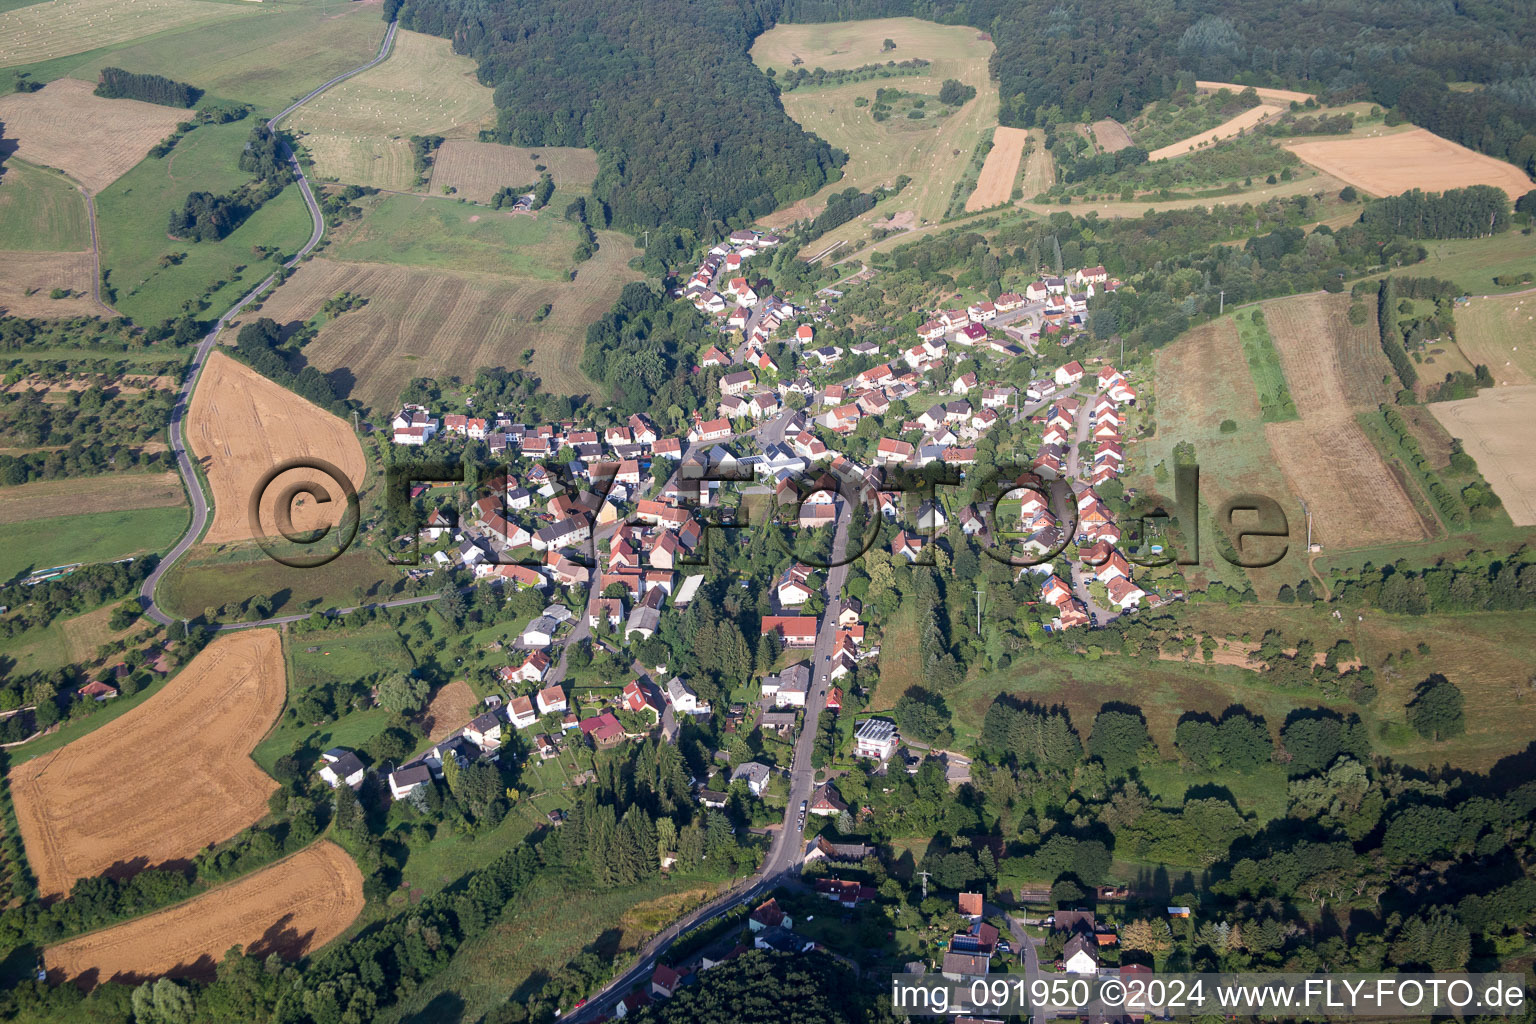 Village - view on the edge of agricultural fields and farmland in Frohnhofen in the state Rhineland-Palatinate, Germany